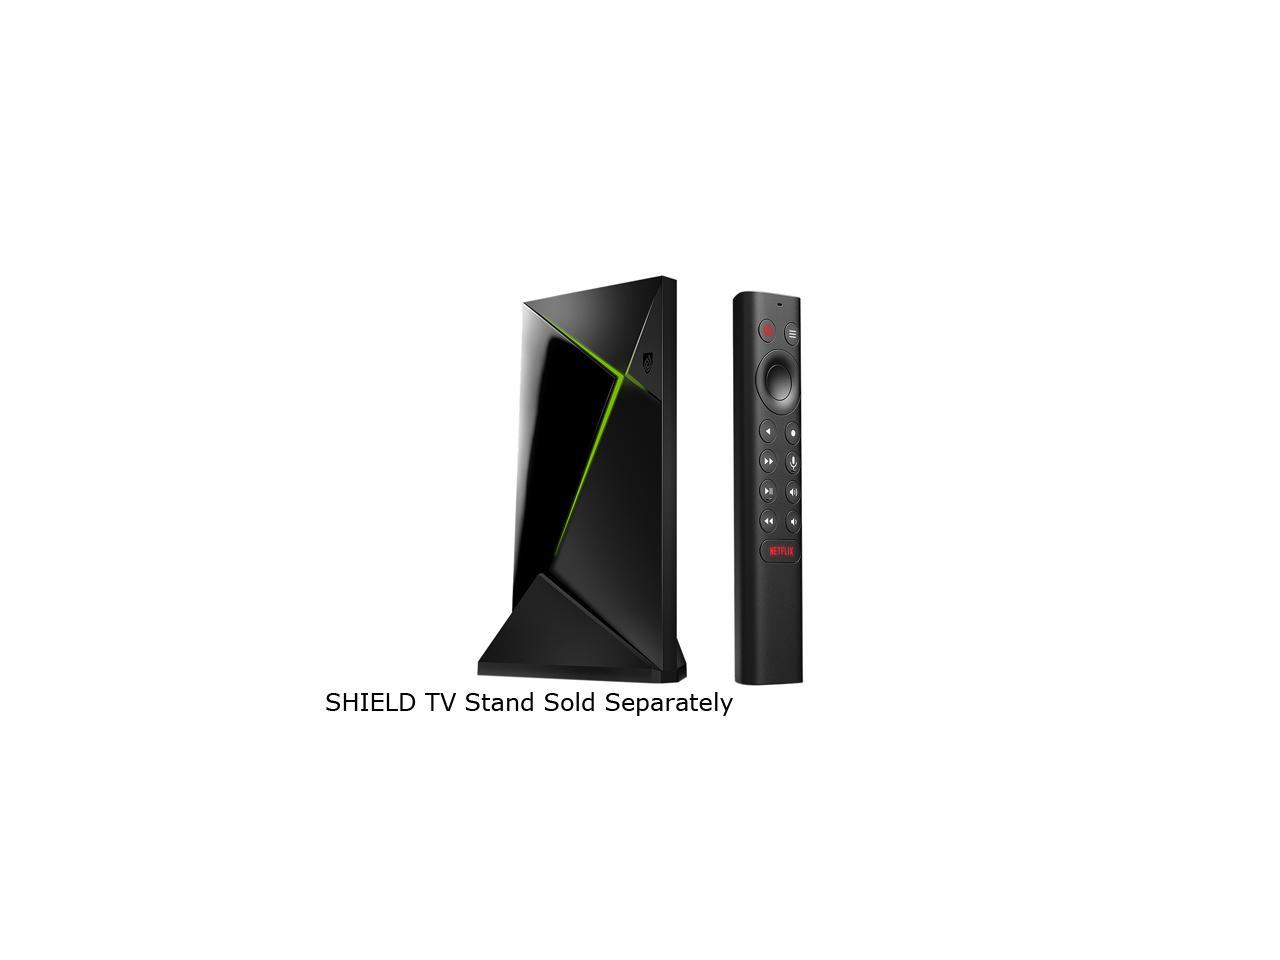 NVIDIA SHIELD Android TV Pro - 4K HDR Streaming Media Player - High Performance, Dolby Vision, 3GB RAM, 2 x USB, Google Assistan